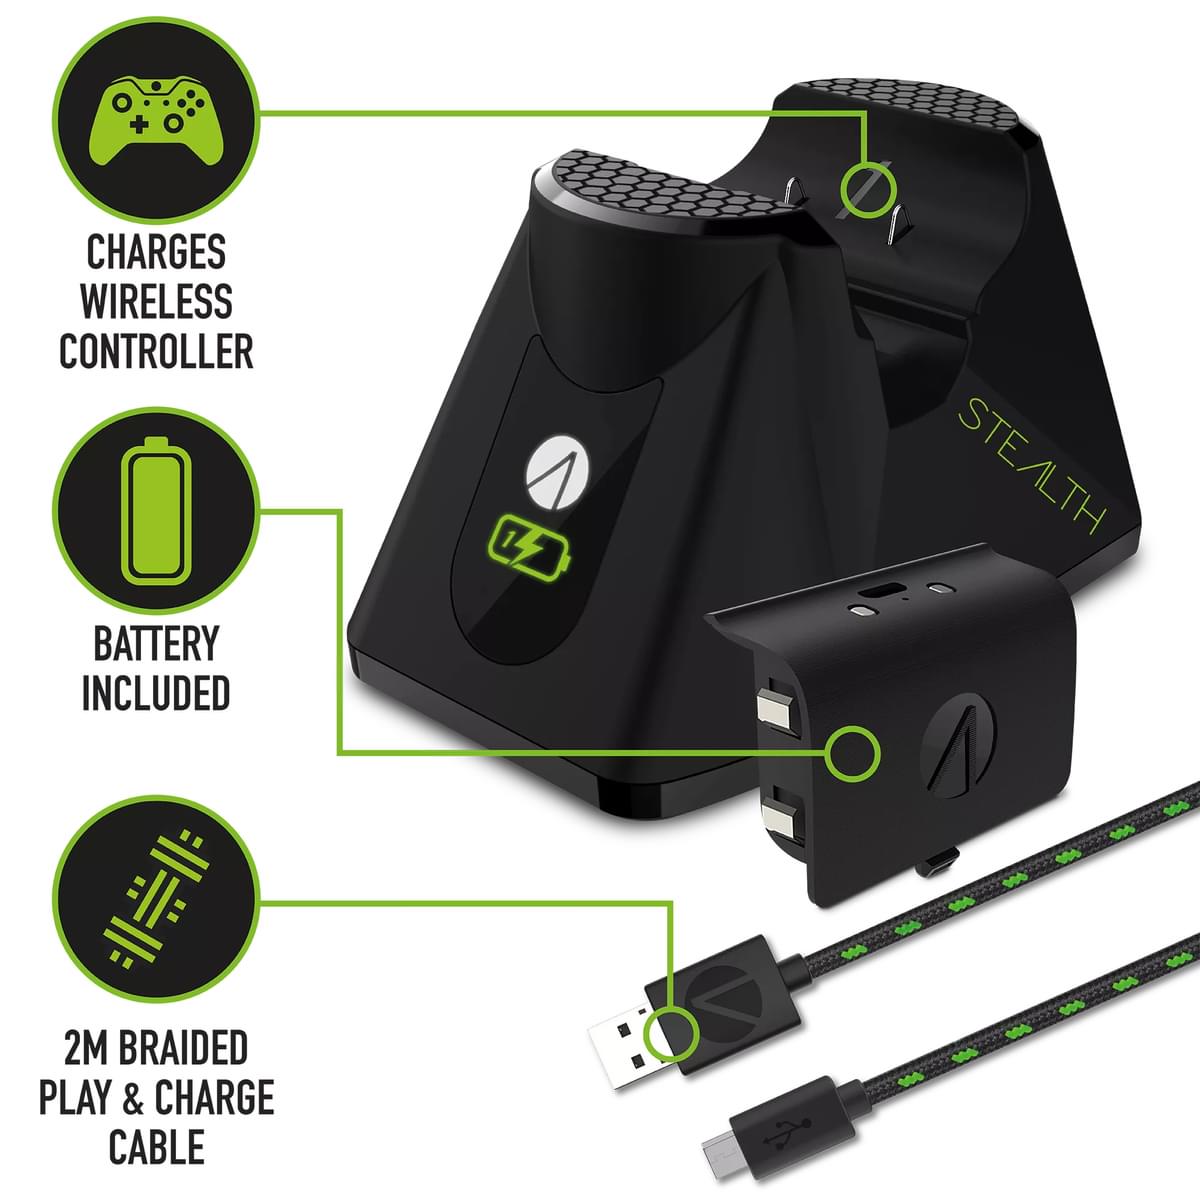 Stealth SX-C60 X Charging Station with Headset Stand for XBOX Series X/S - Black